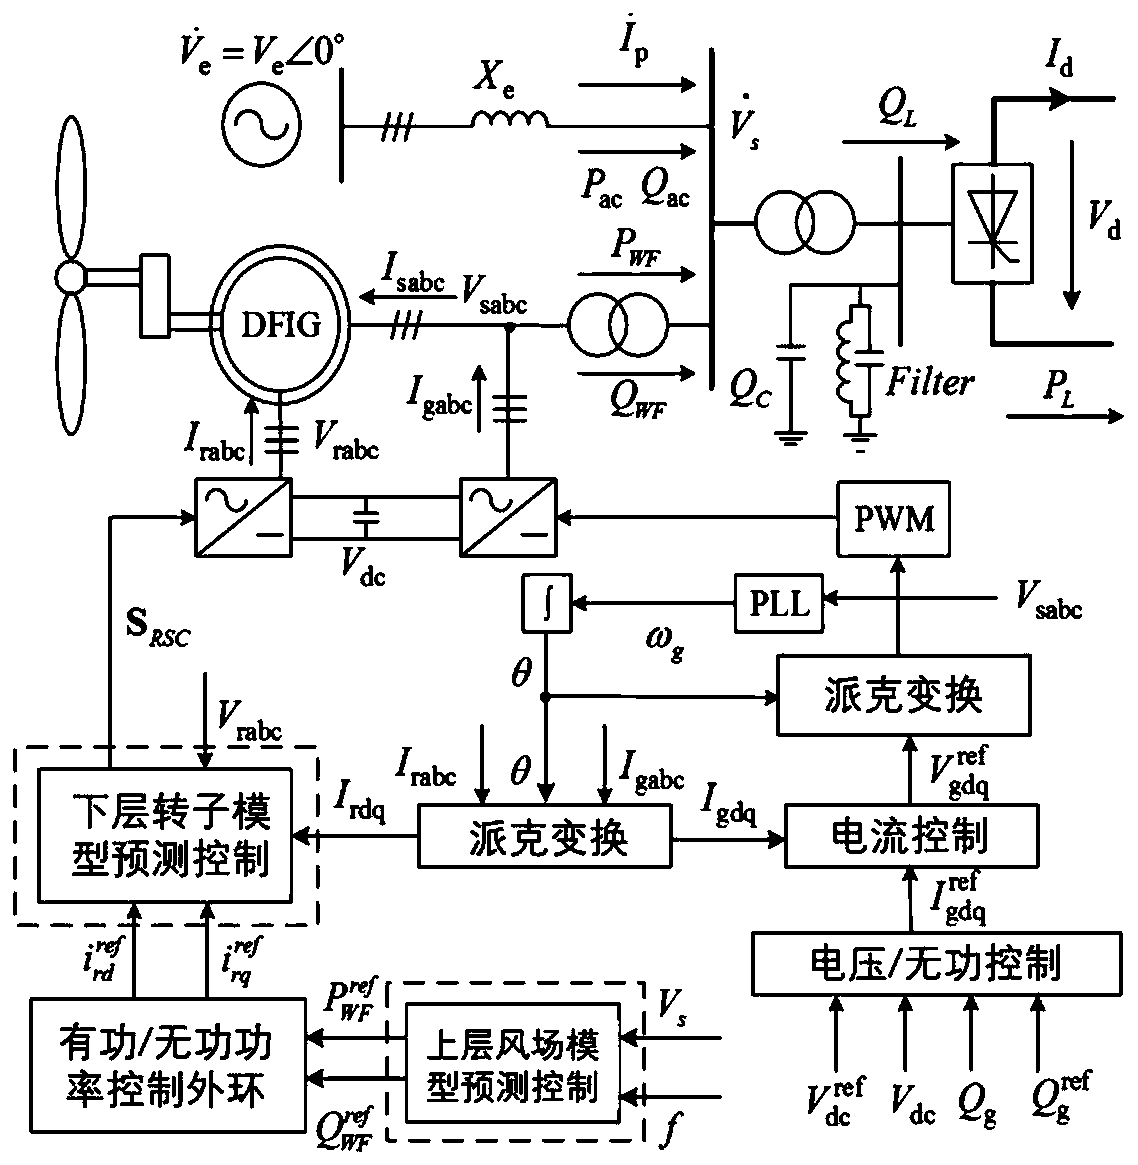 Double-fed fan voltage regulation method based on double-layer model predictive control